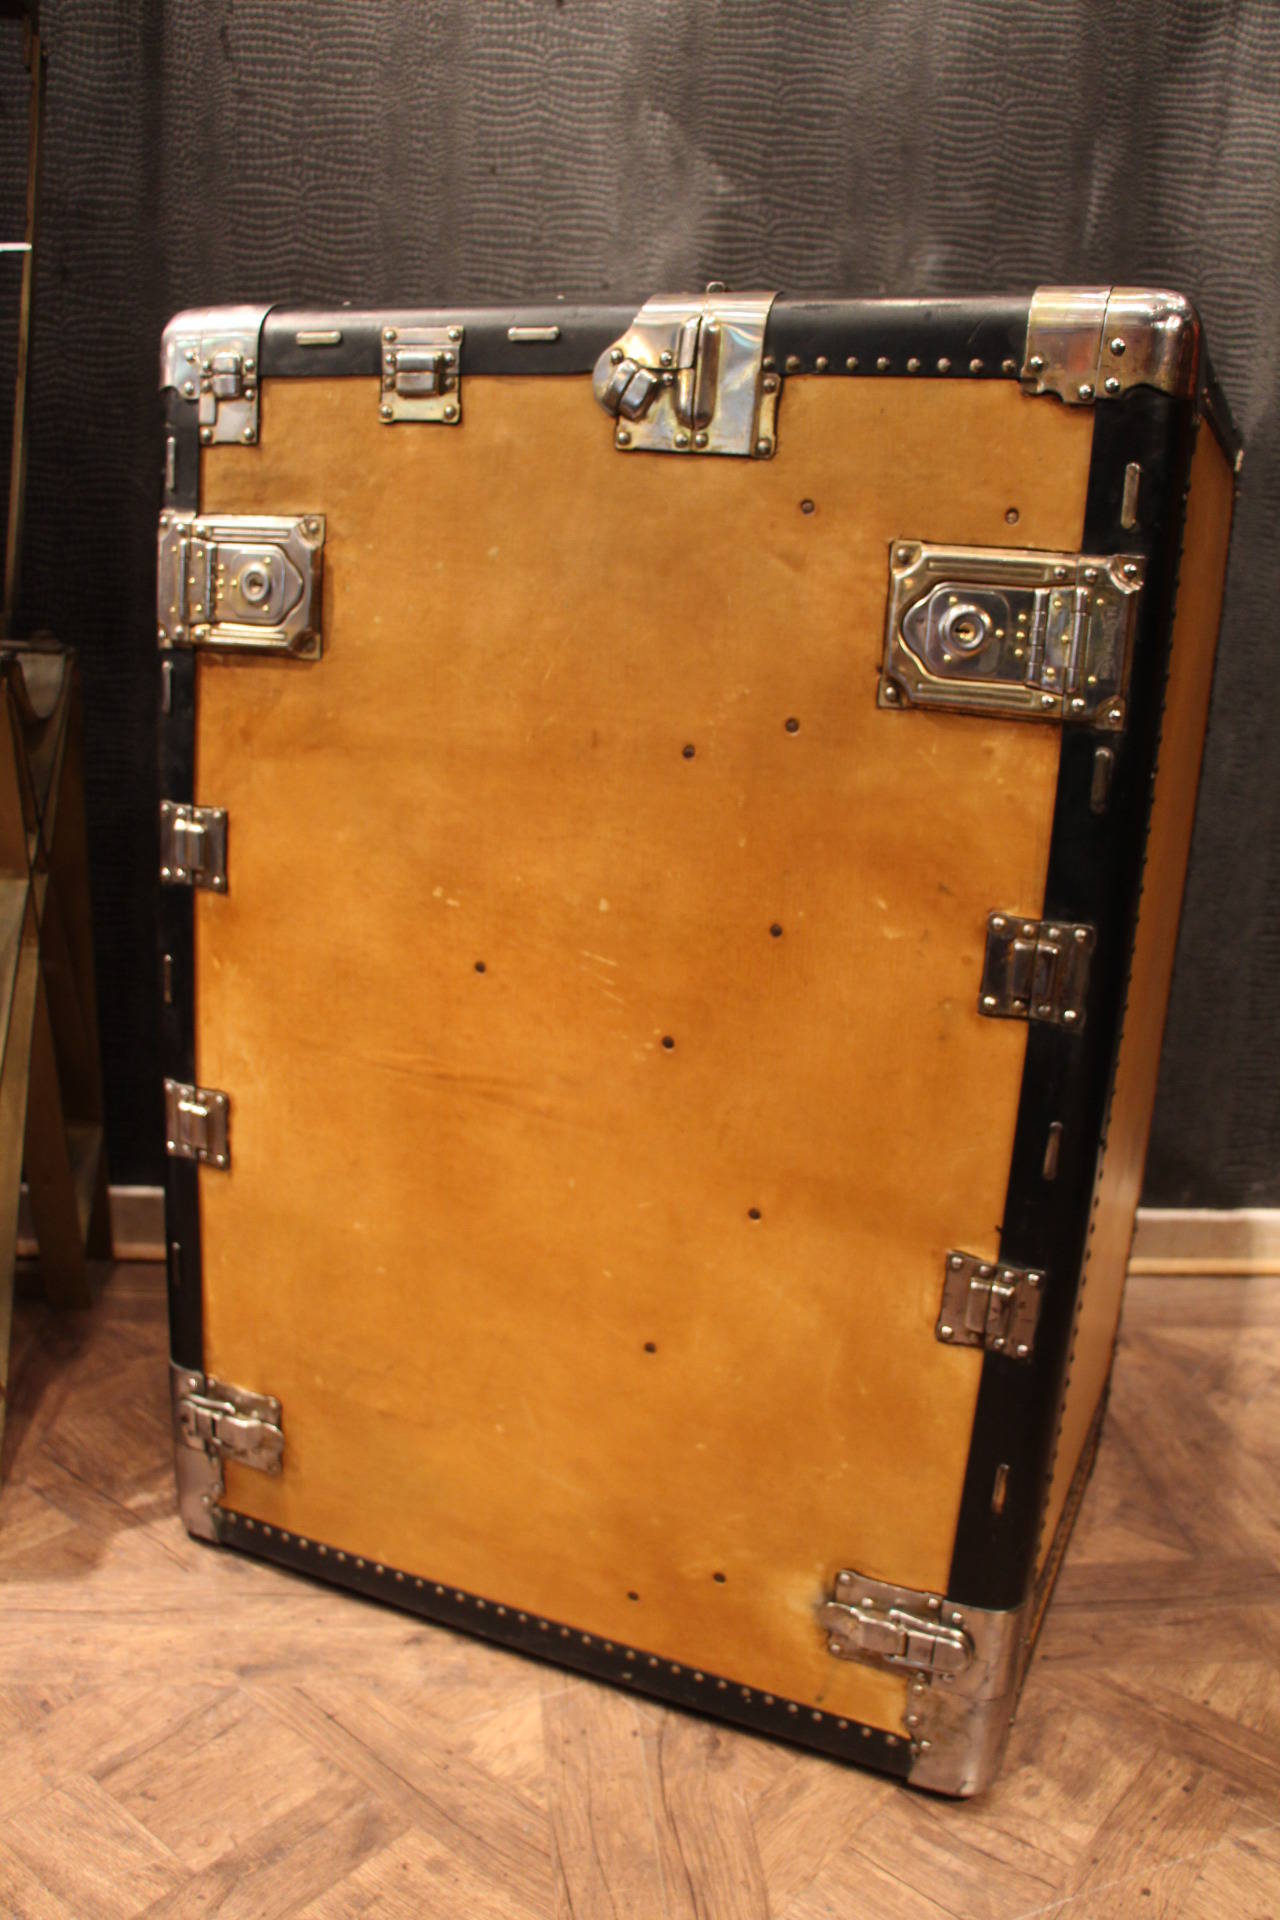 This spectacular beige leather wardrobe trunk features two doors, one hiding a folding hanging section and the other hiding a series of five drawers.
This very rare Hartmann turn table trunk is in beautiful condition. It is made to spin around on